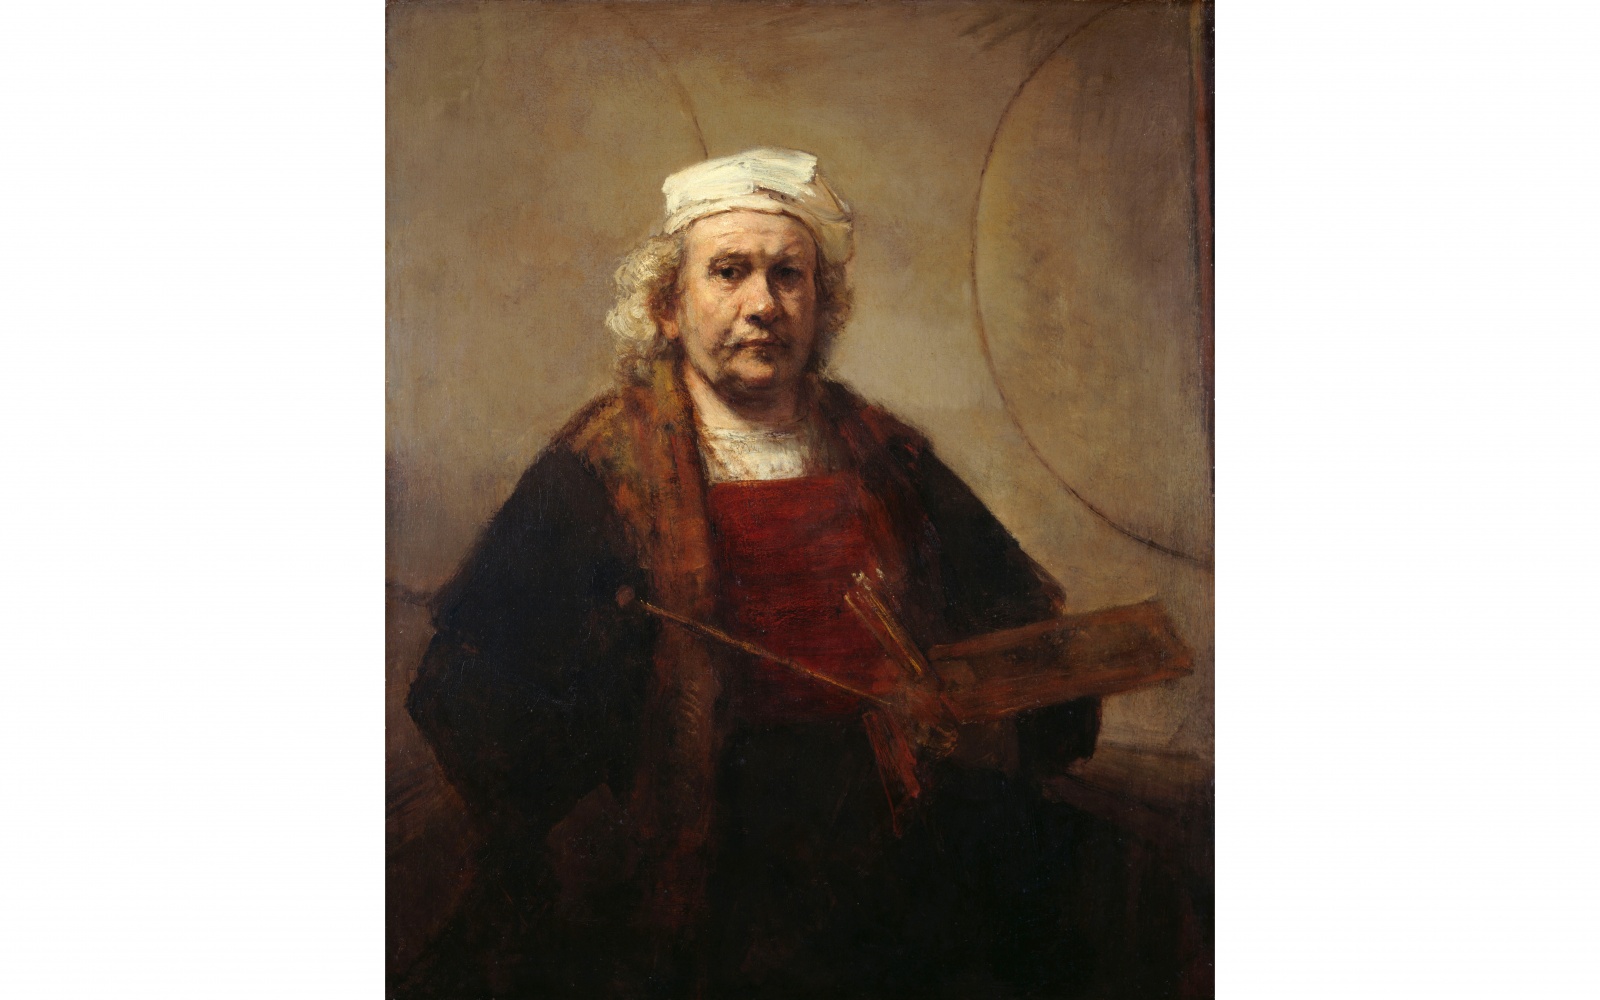 For Amsterdam’s Rijksmuseum, a Rembrandt Exhibit at Last